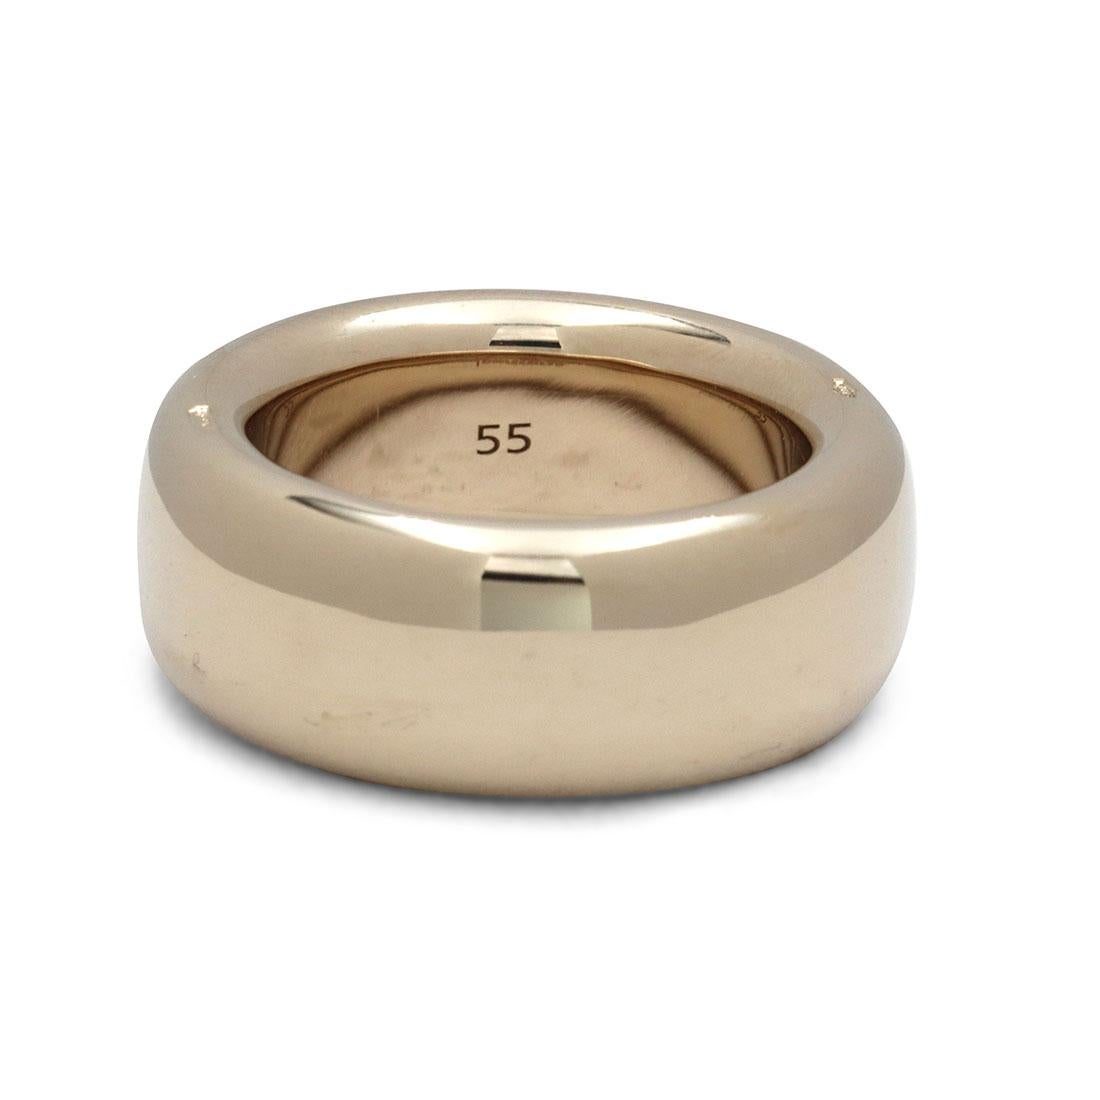 Authentic Pomellato Iconica ring crafted in 18 karat yellow gold. Designed as a band, this  daring ring features a smooth rounded finish. Signed Pomellato, 55, with serial number. Ring size 55 (7 1/4 US). This ring is not presented with the original